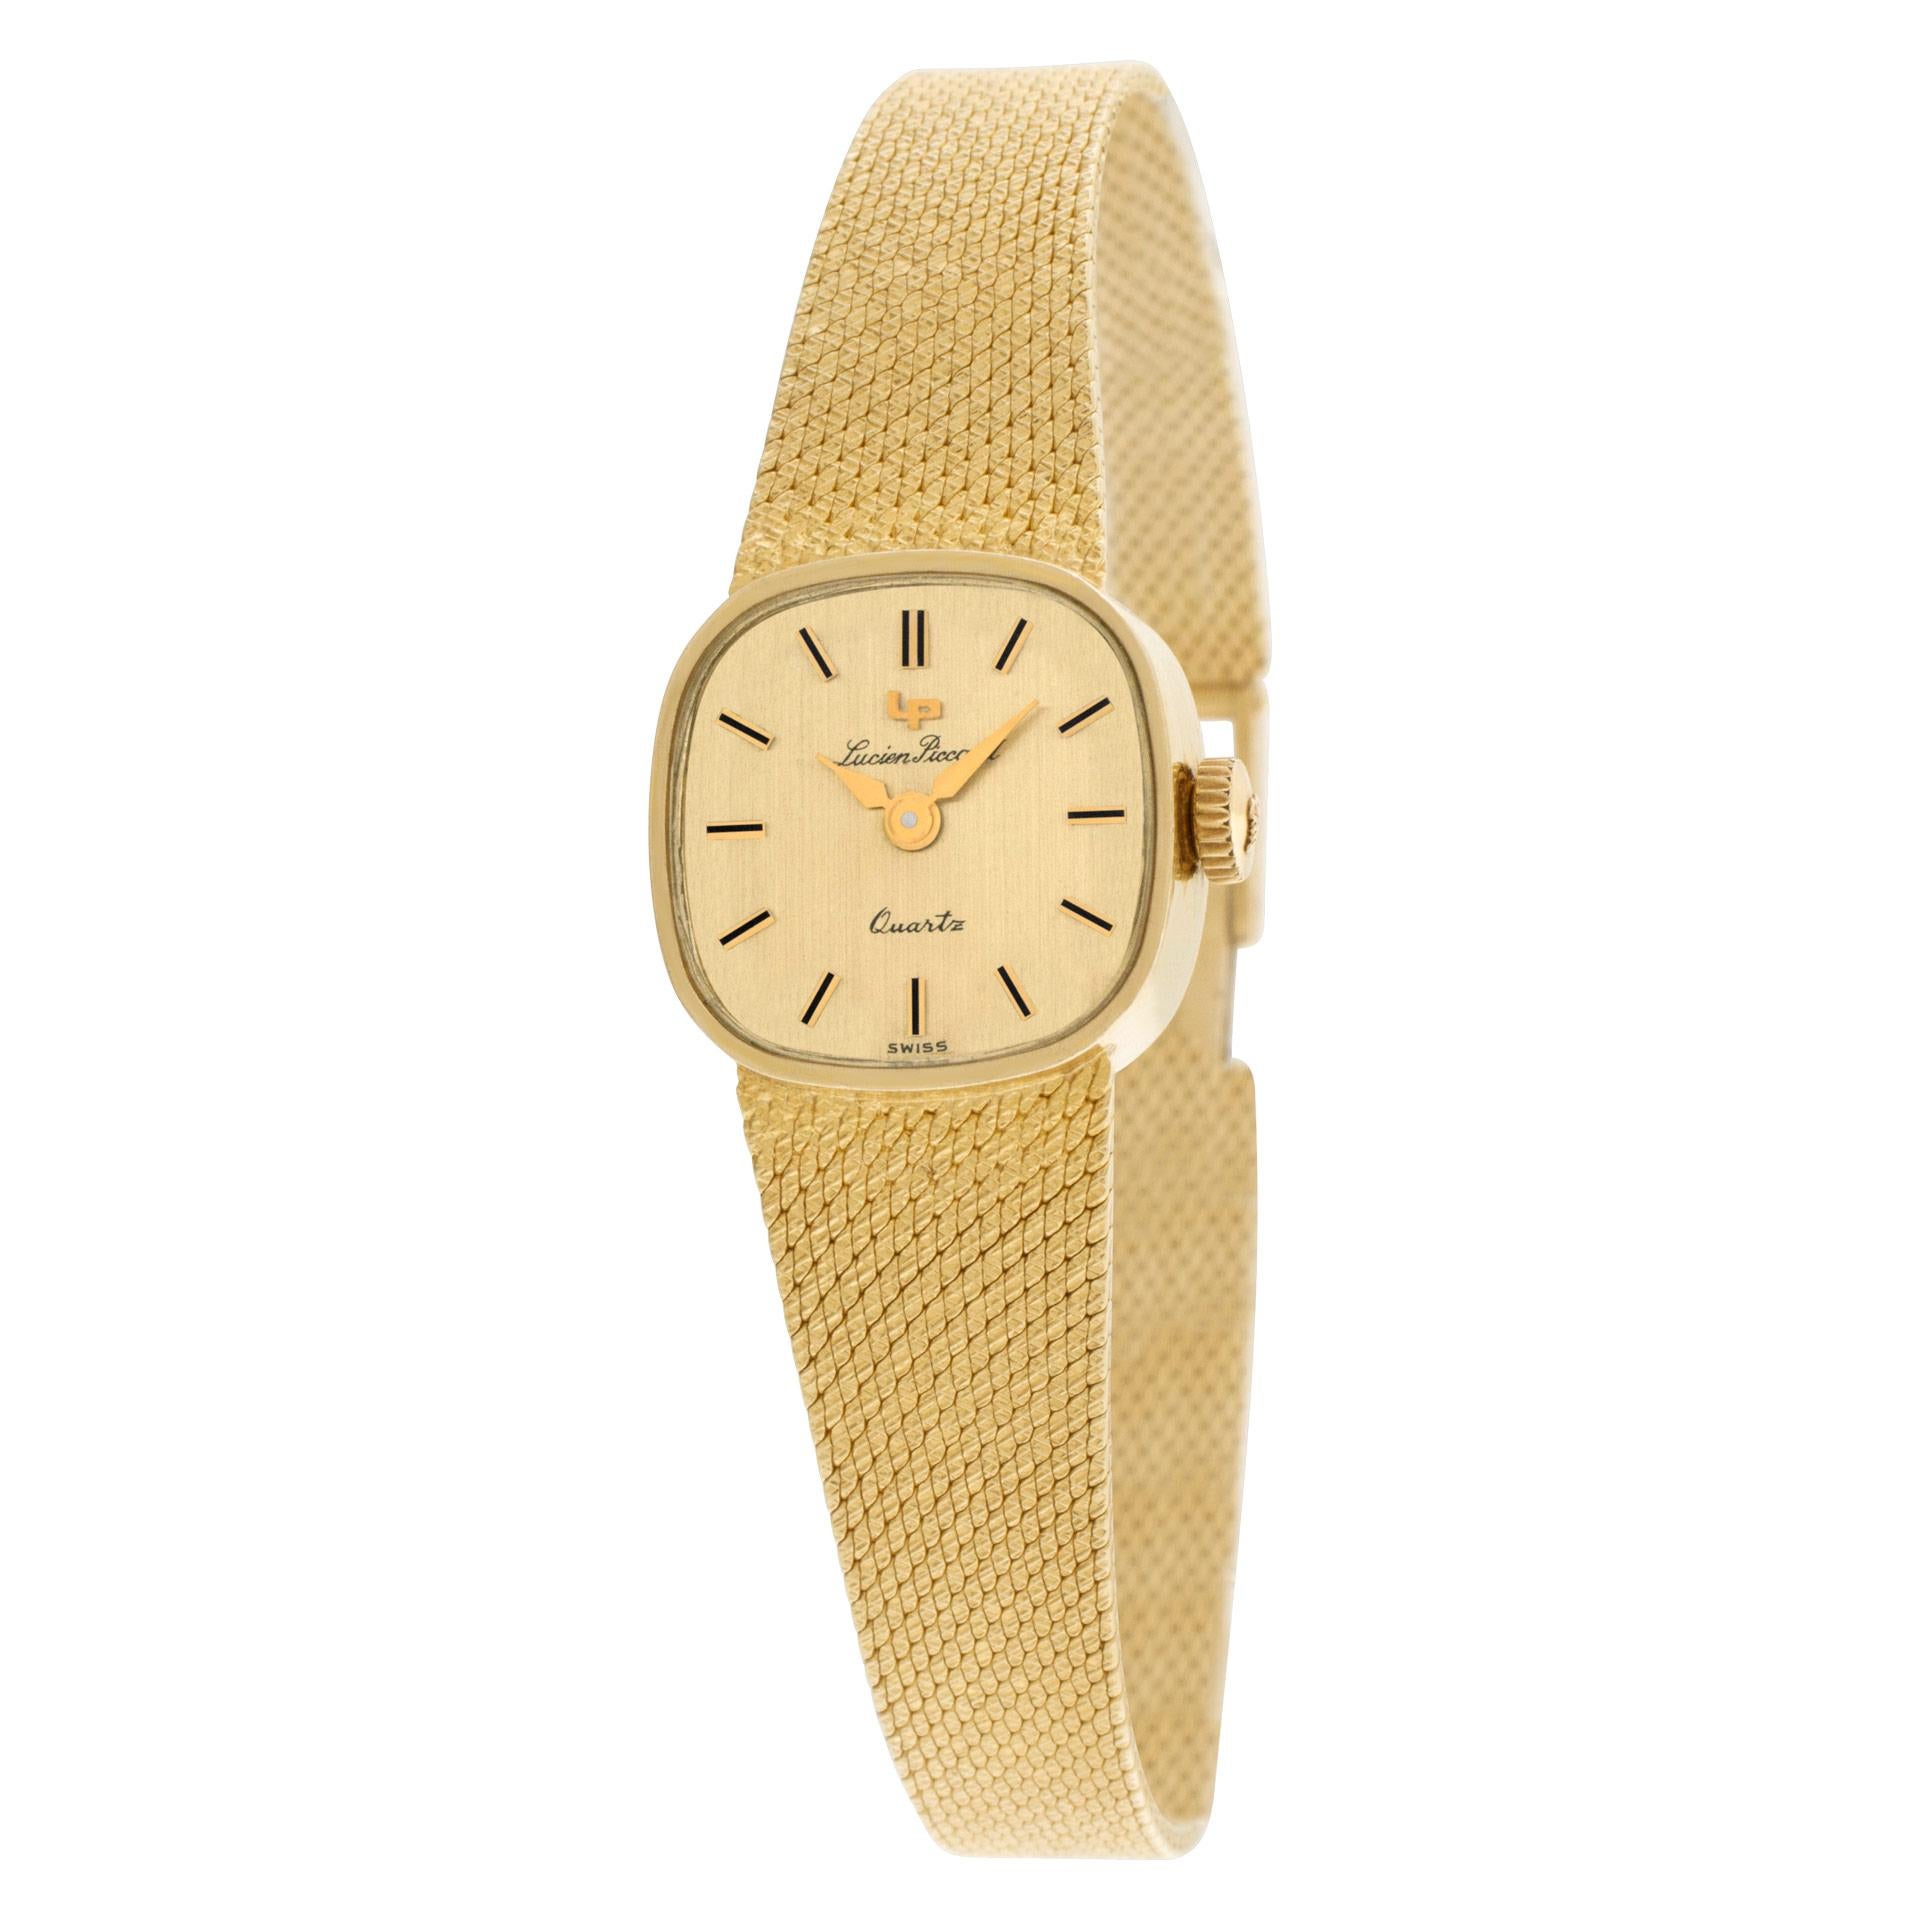 Ladies Lucien Picard Classic in 14k on a mesh band. Quartz. 17 mm case size. Ref 33165. Will fit a 6